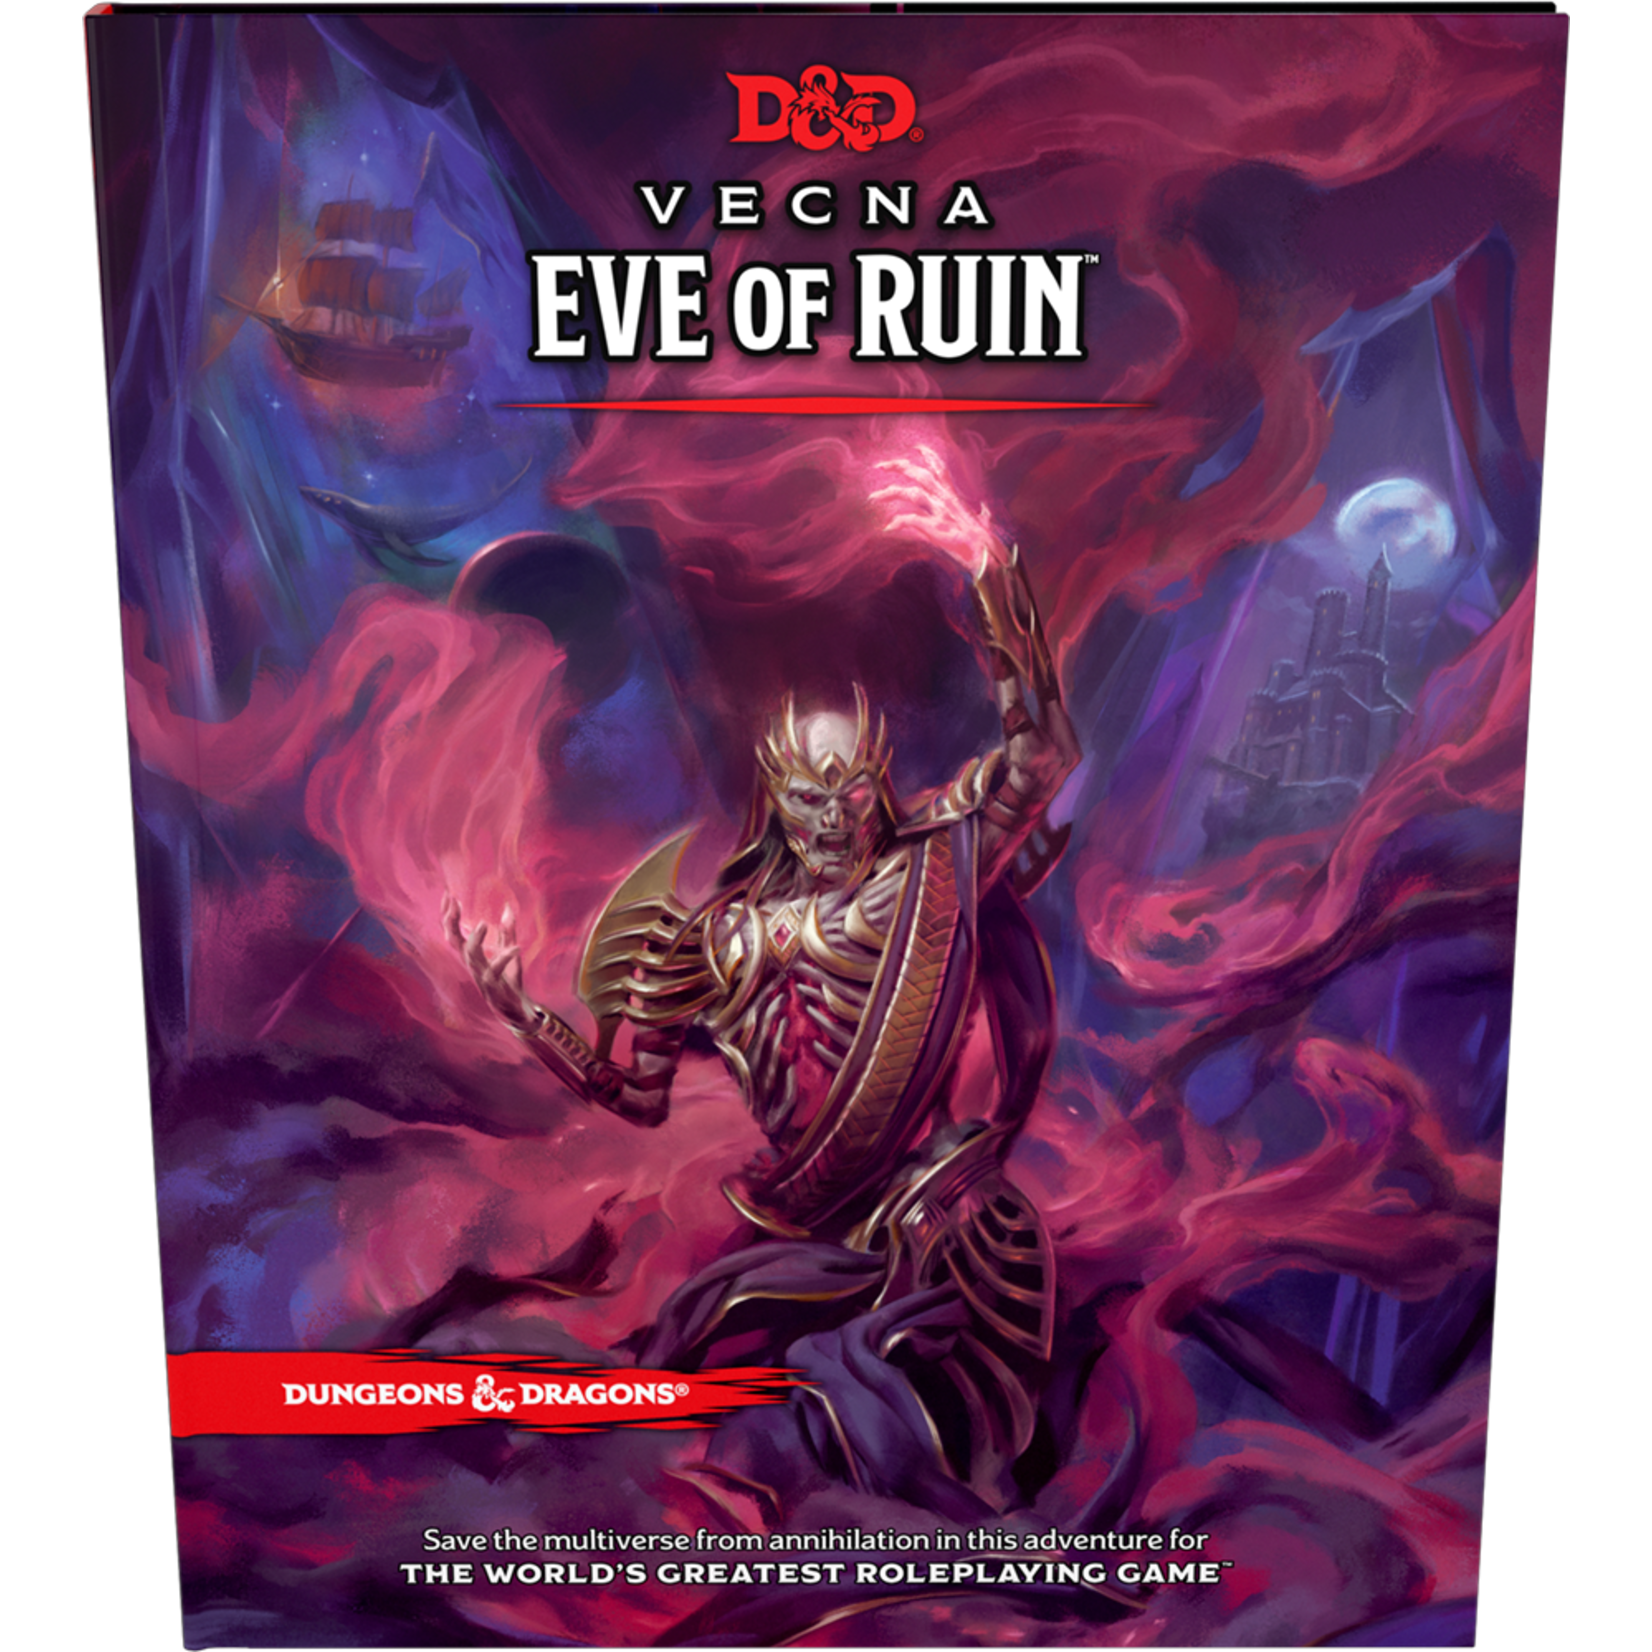 Dungeons & Dragons Dungeons & Dragons – Vecna: Eve of Ruin (5th Edition, Regular Cover)